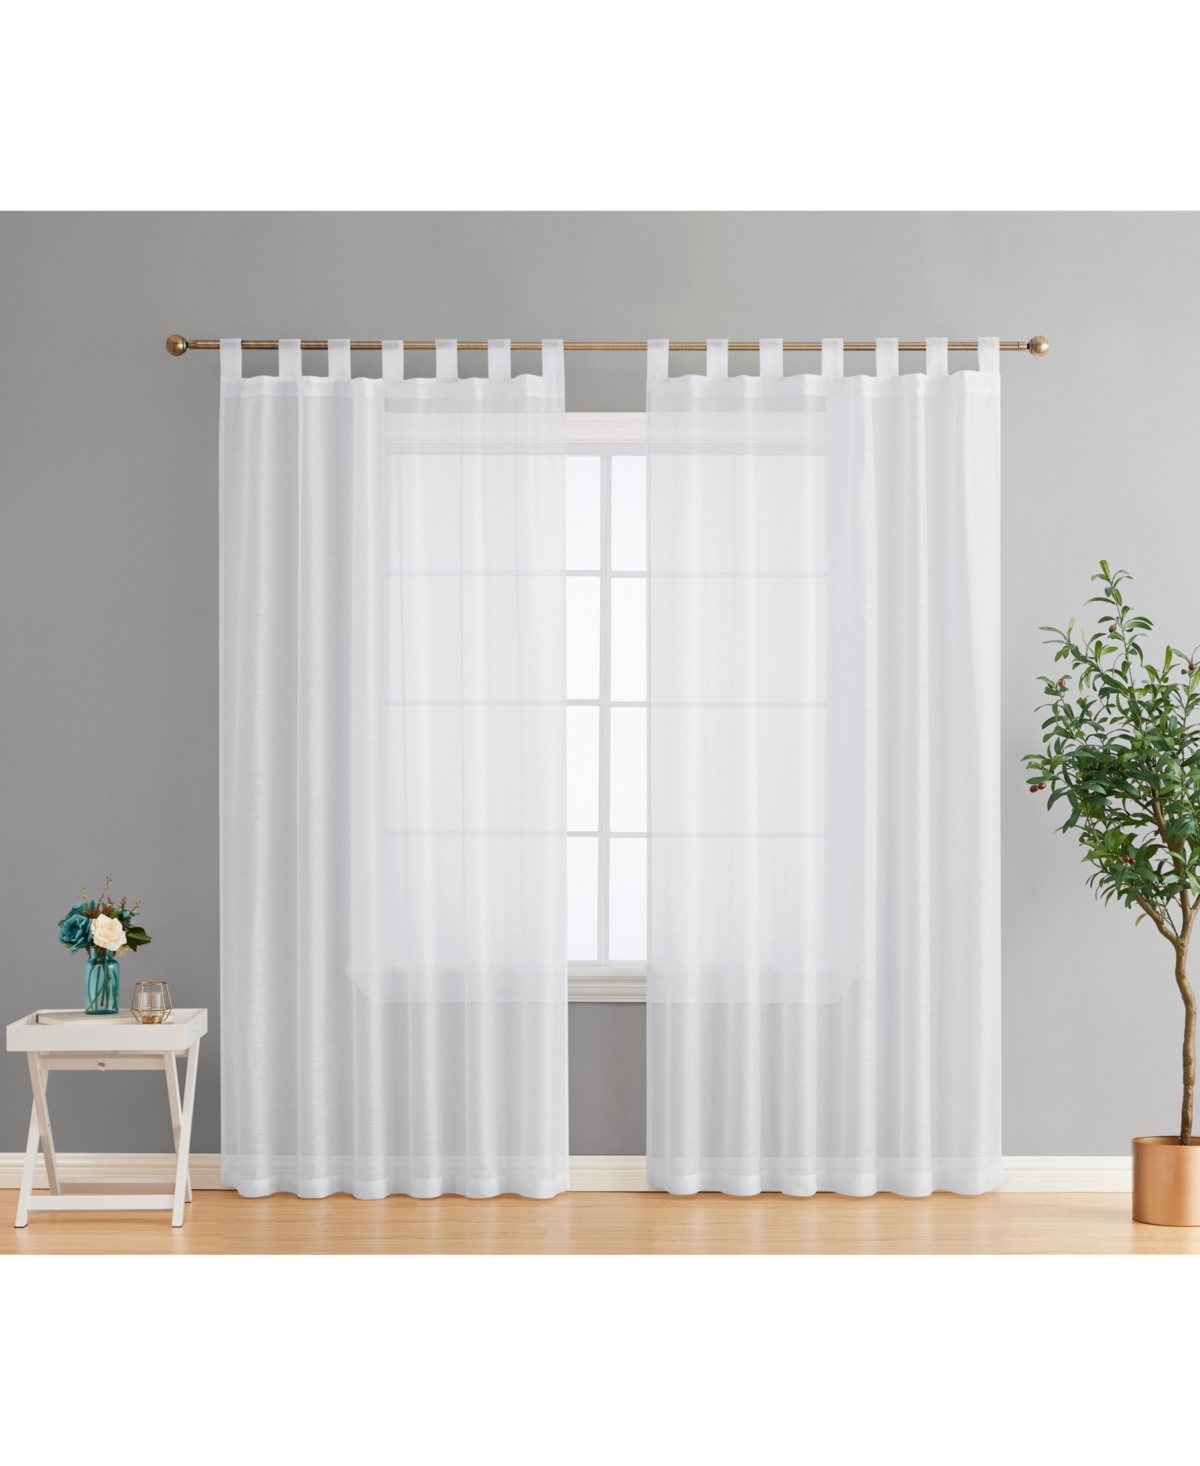 Addison Semi Sheer Light Filtering Transparent Tab Top Lightweight Window Curtains Drapery Panels for Bedroom & Living Room, 2 Panels - White